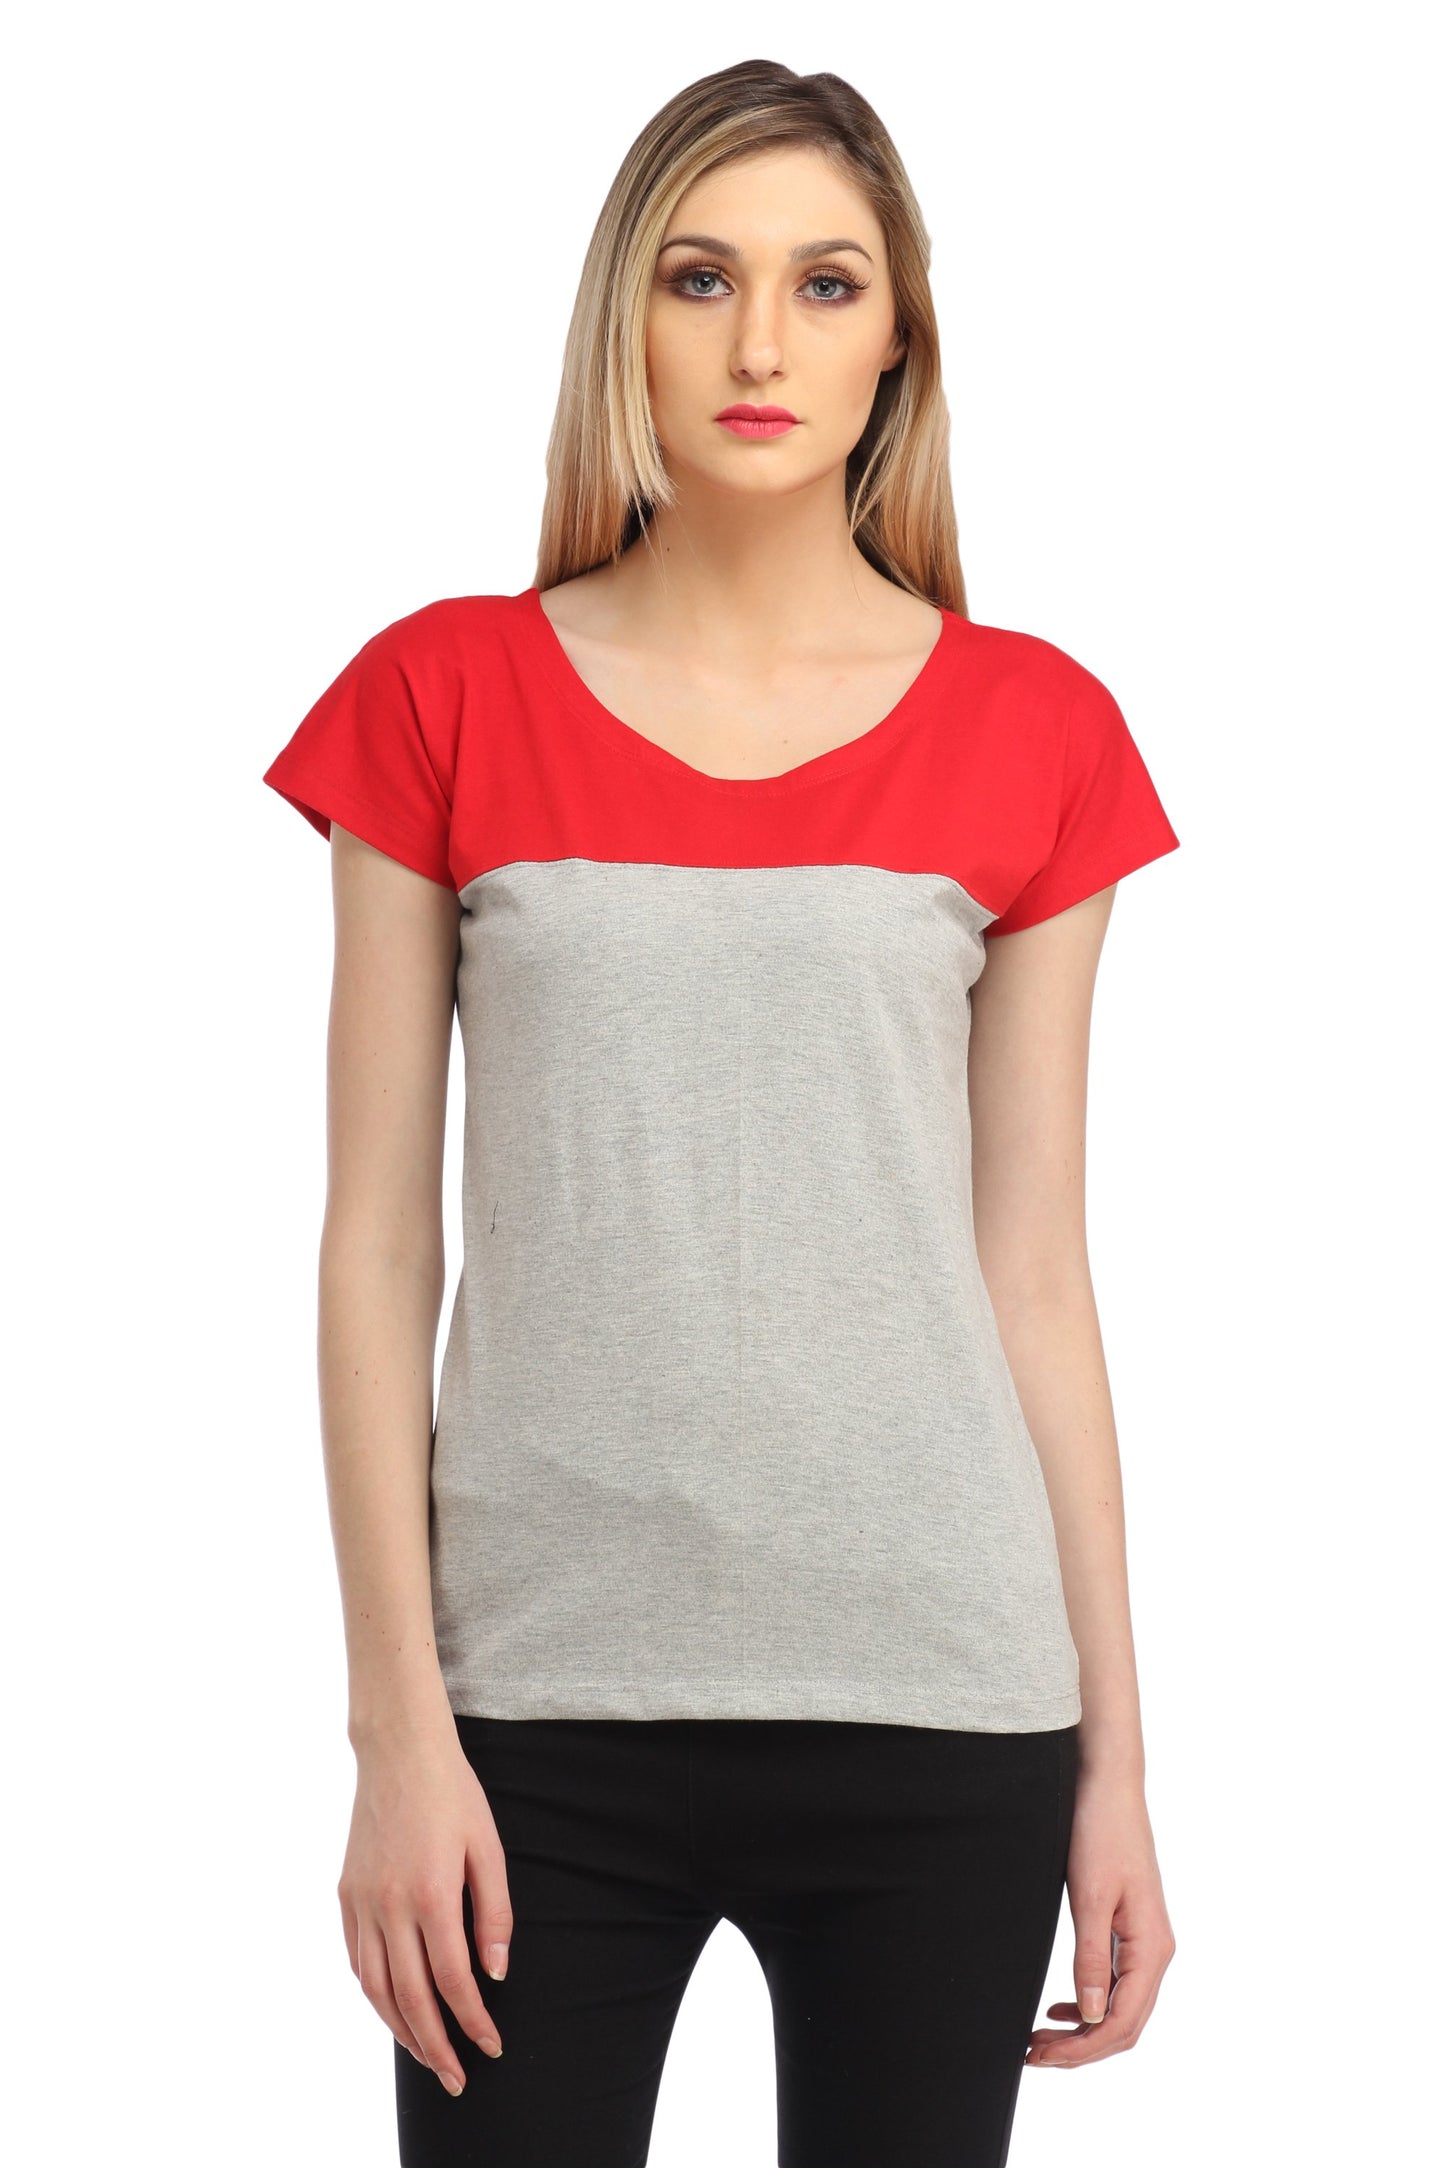 Grey and Red Solid Top